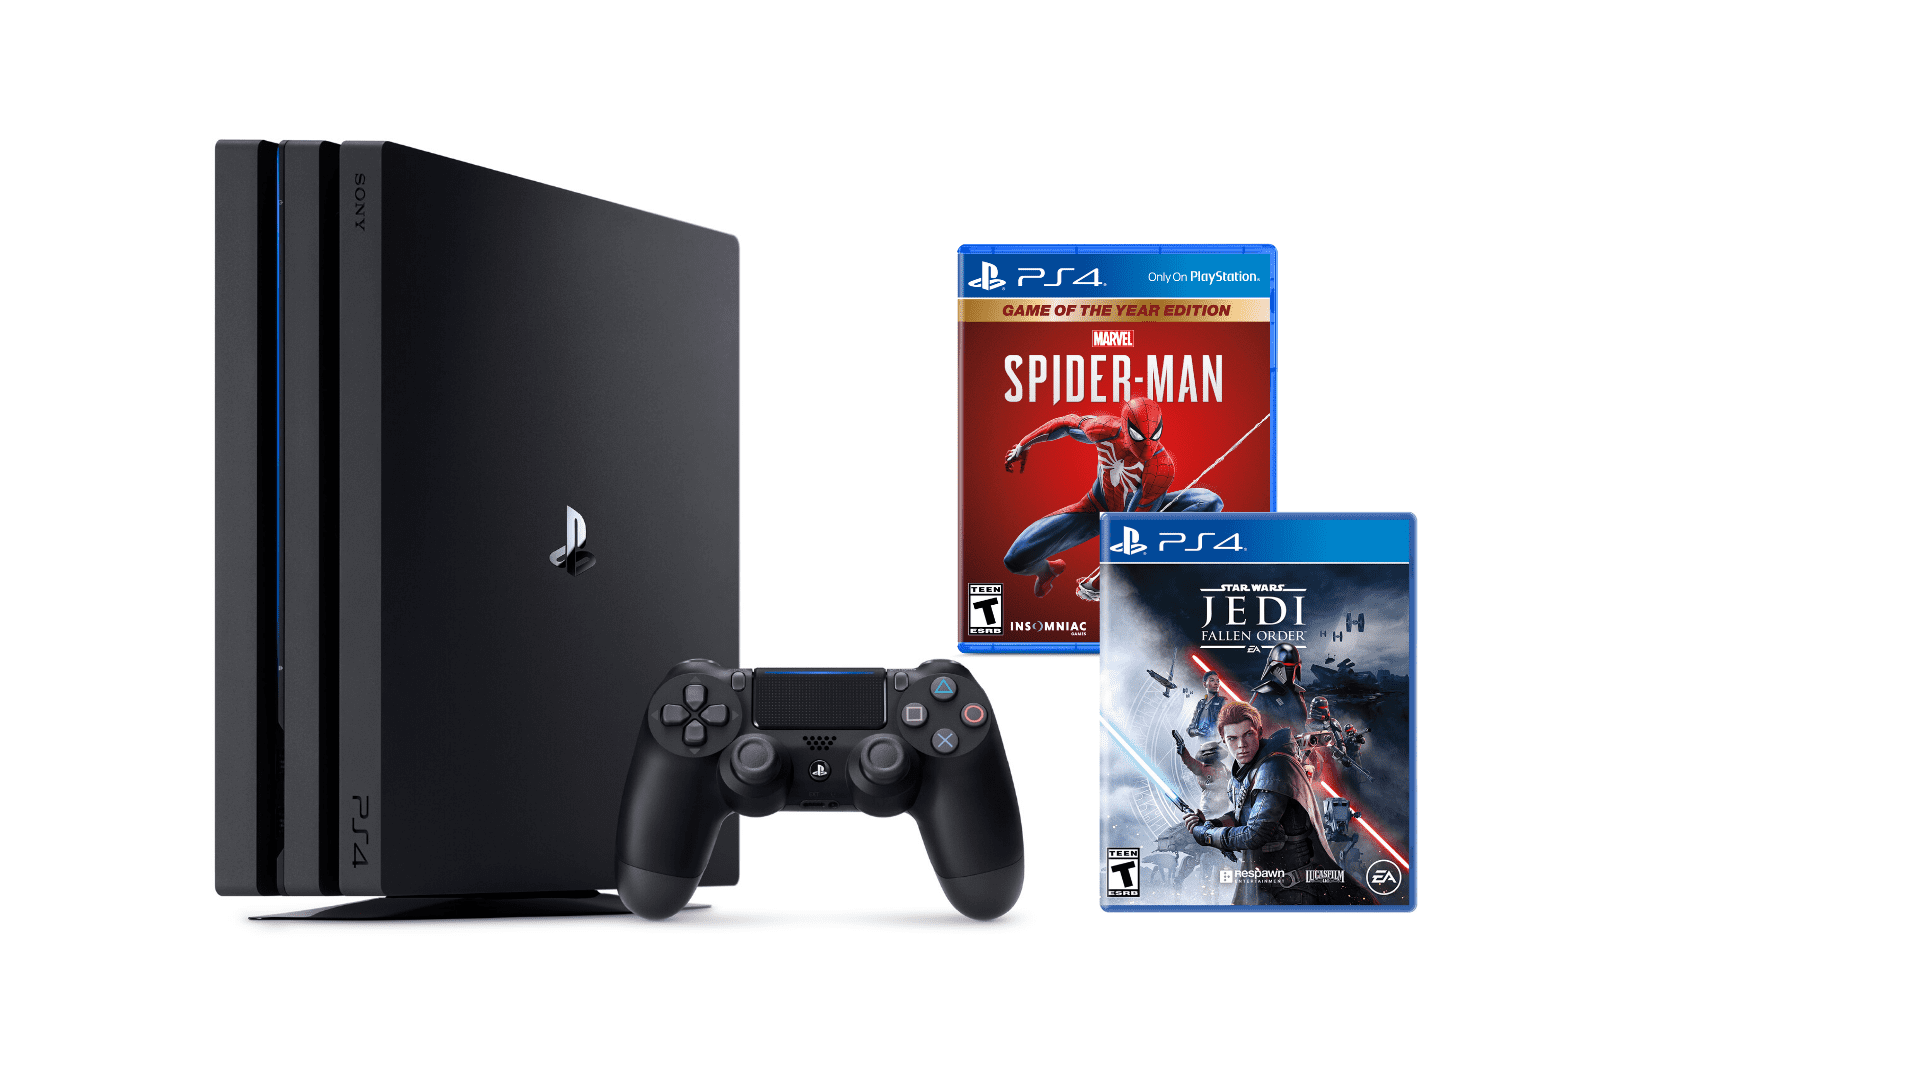 PlayStation 4 Pro 1TB with BONUS StarWars: Jedi Fallen Order and Spiderman  Game of the Year Edition